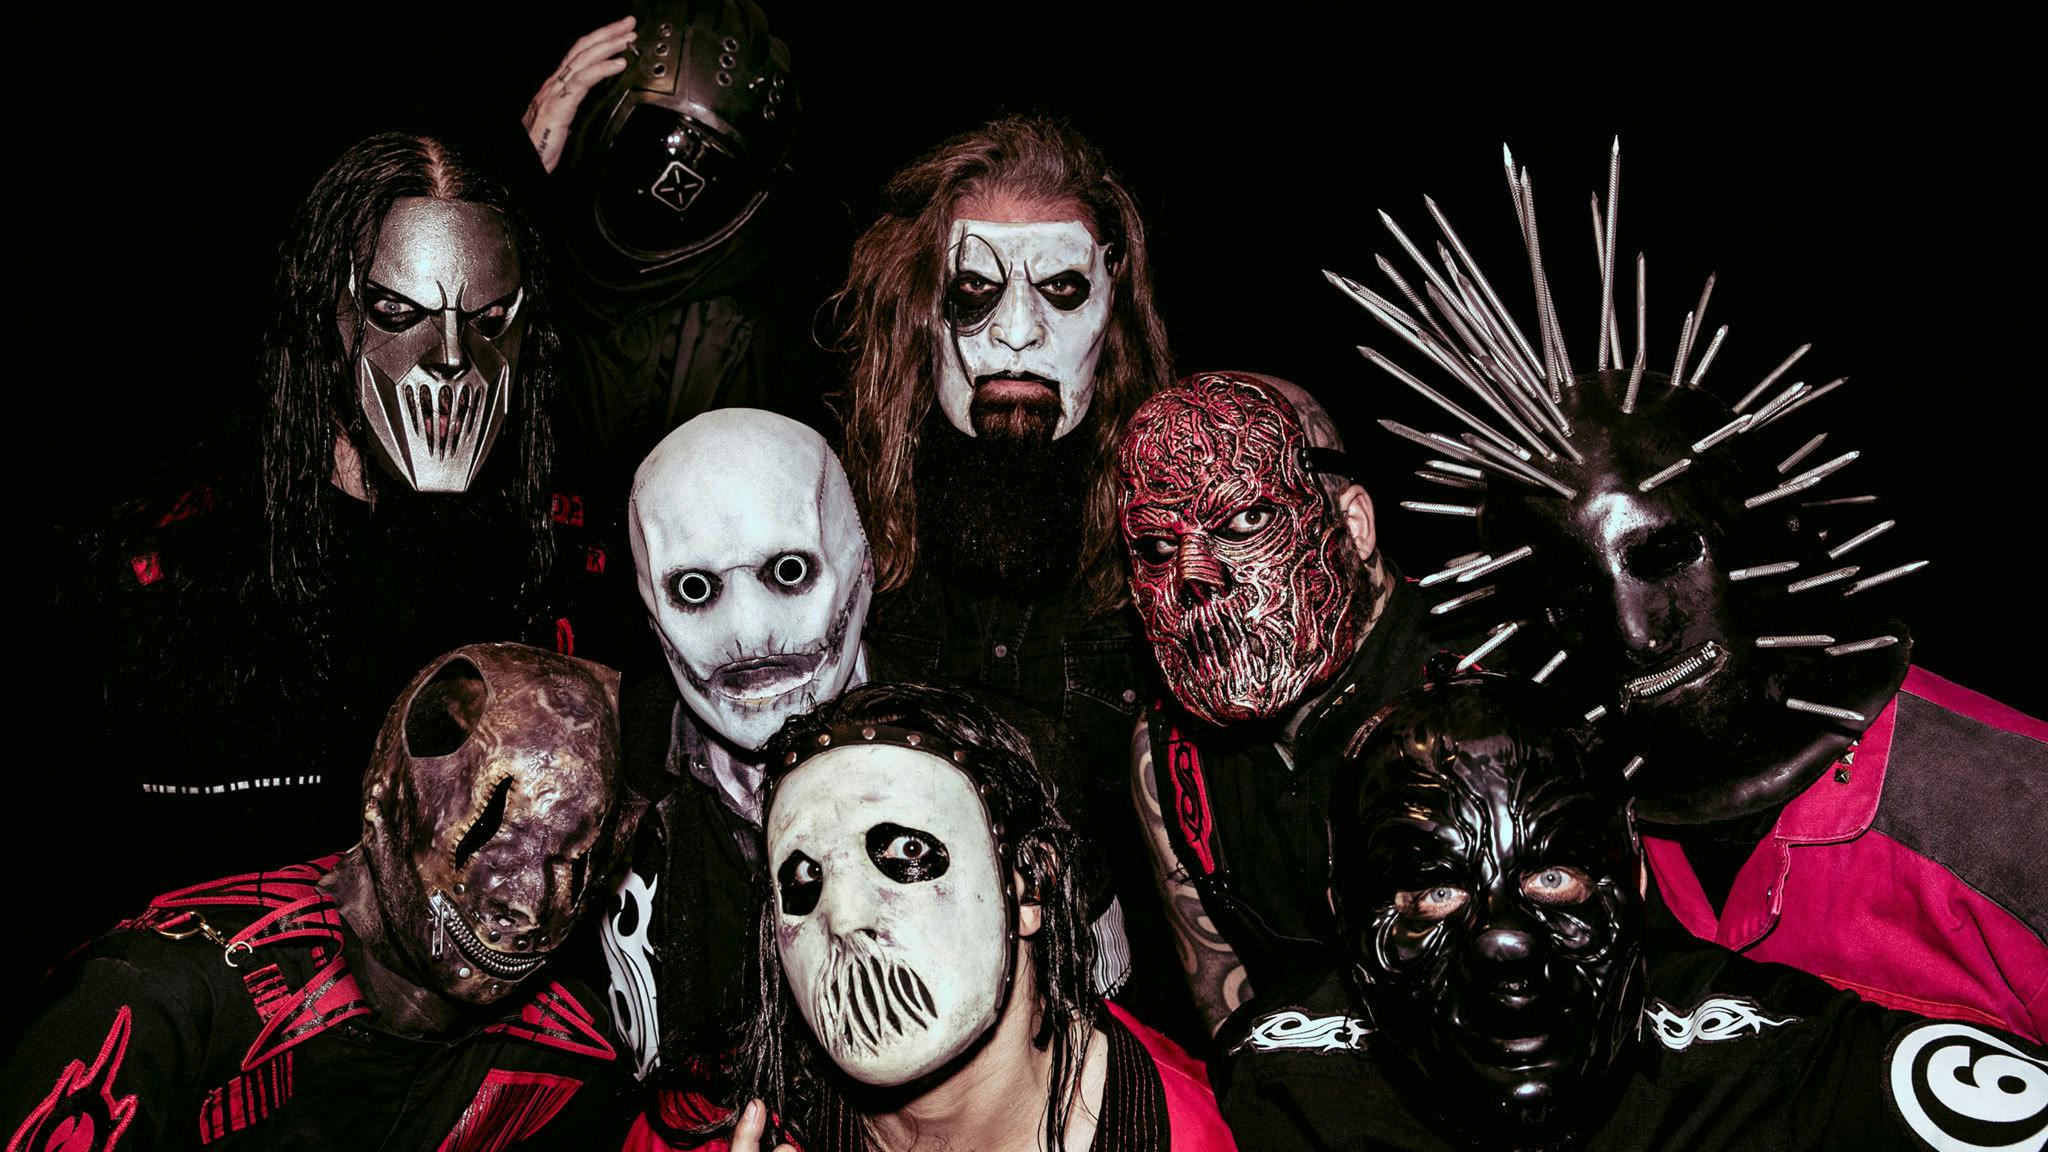 Slipknot’s Clown: “Wouldn’t it be great if we had seven days at a reasonably sized venue, and played every album in its entirety?”